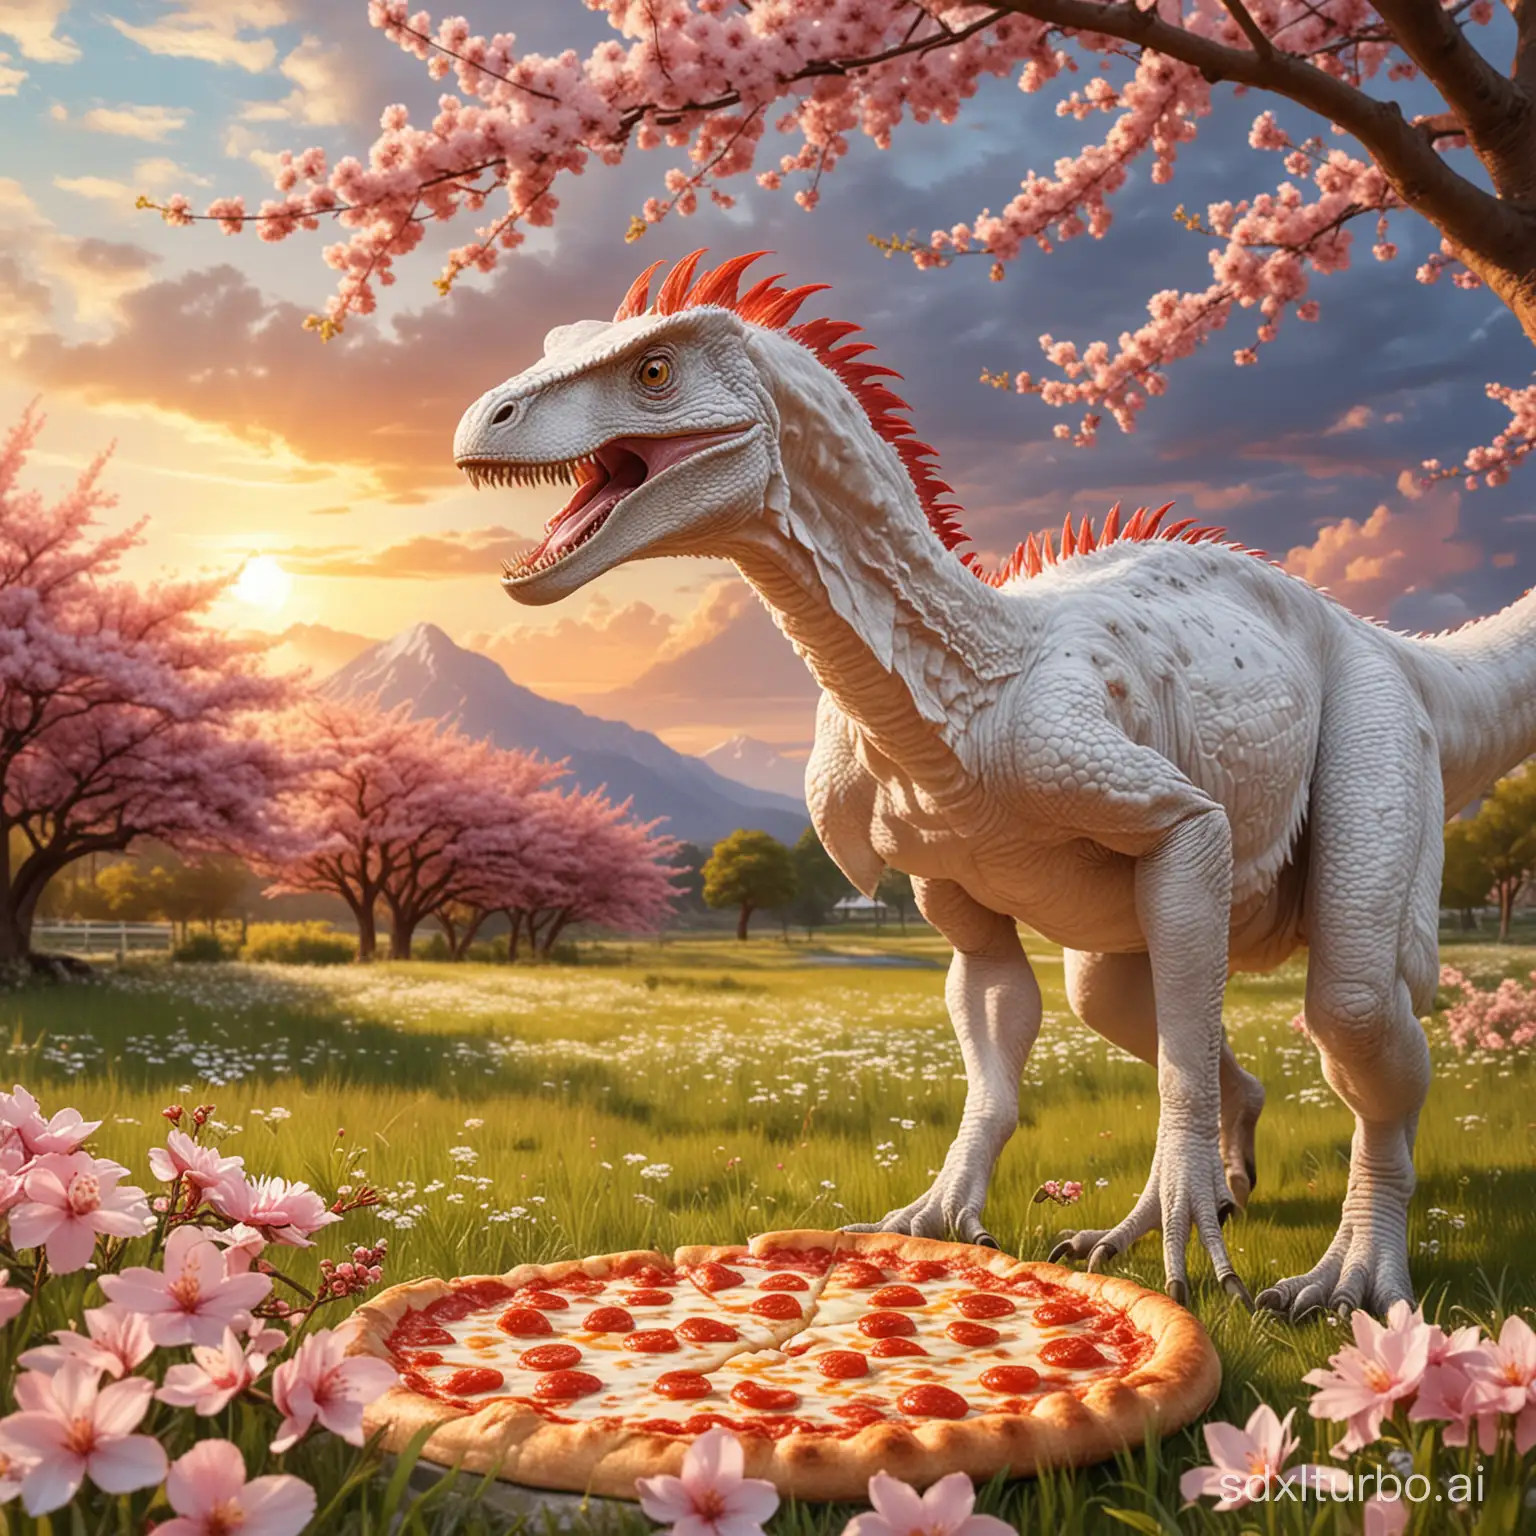 Velociraptor-with-Mohawk-Enjoying-Pepperoni-Pizza-in-Flower-Meadow-Sunset-Painting